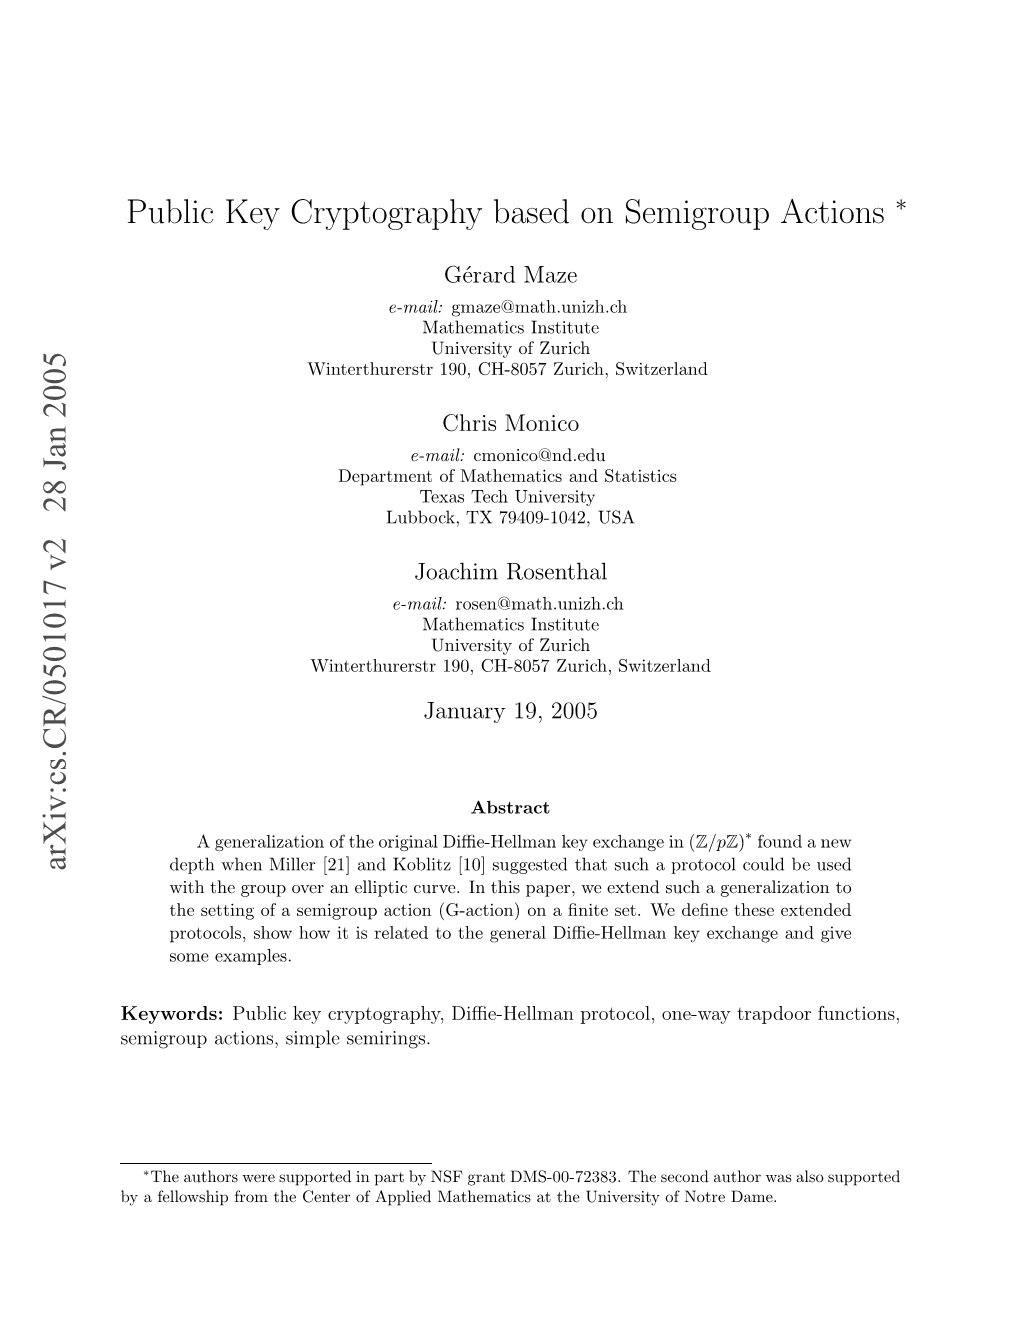 Public Key Cryptography Based on Semigroup Actions